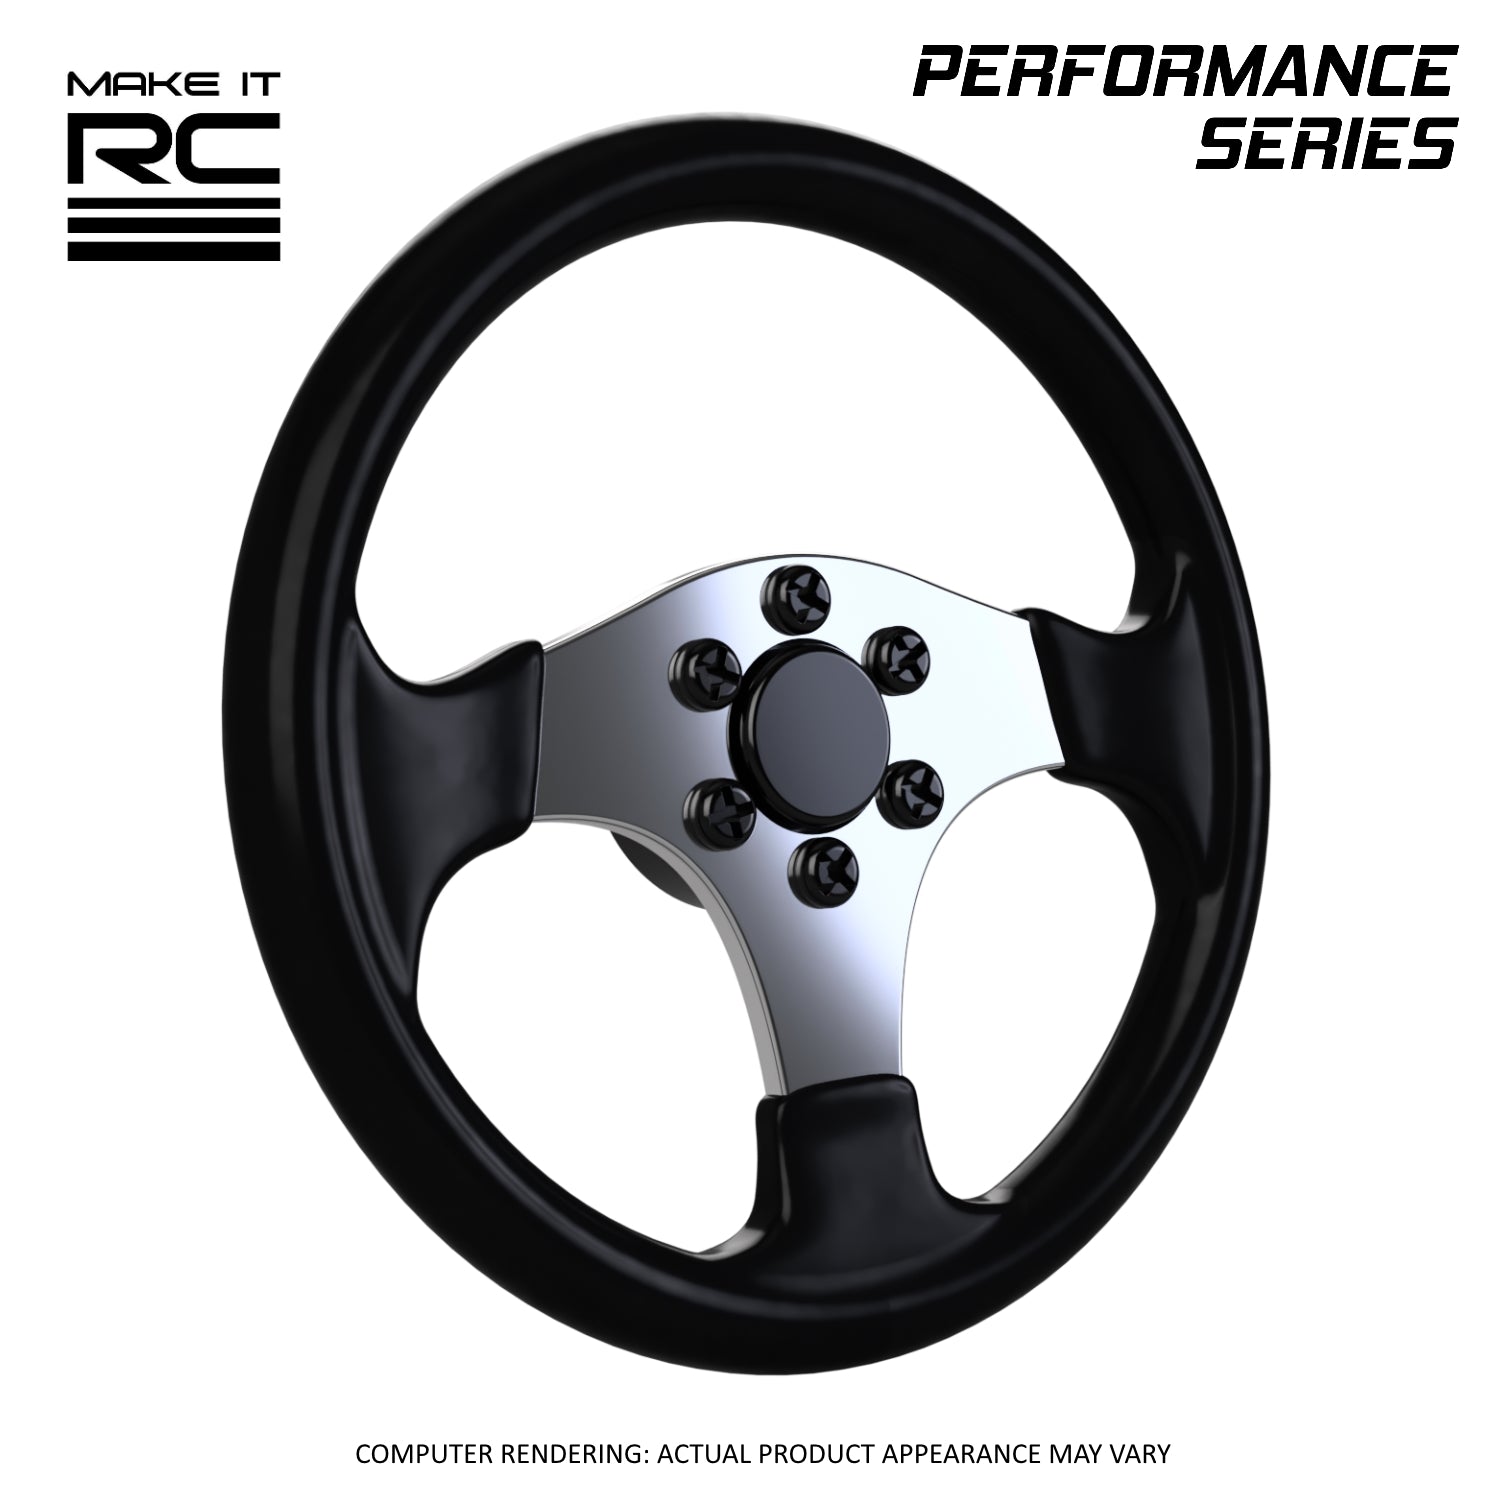 Make It RC GEM 150 Racing Steering Wheel for 1/10 Scale RC Car and Truck